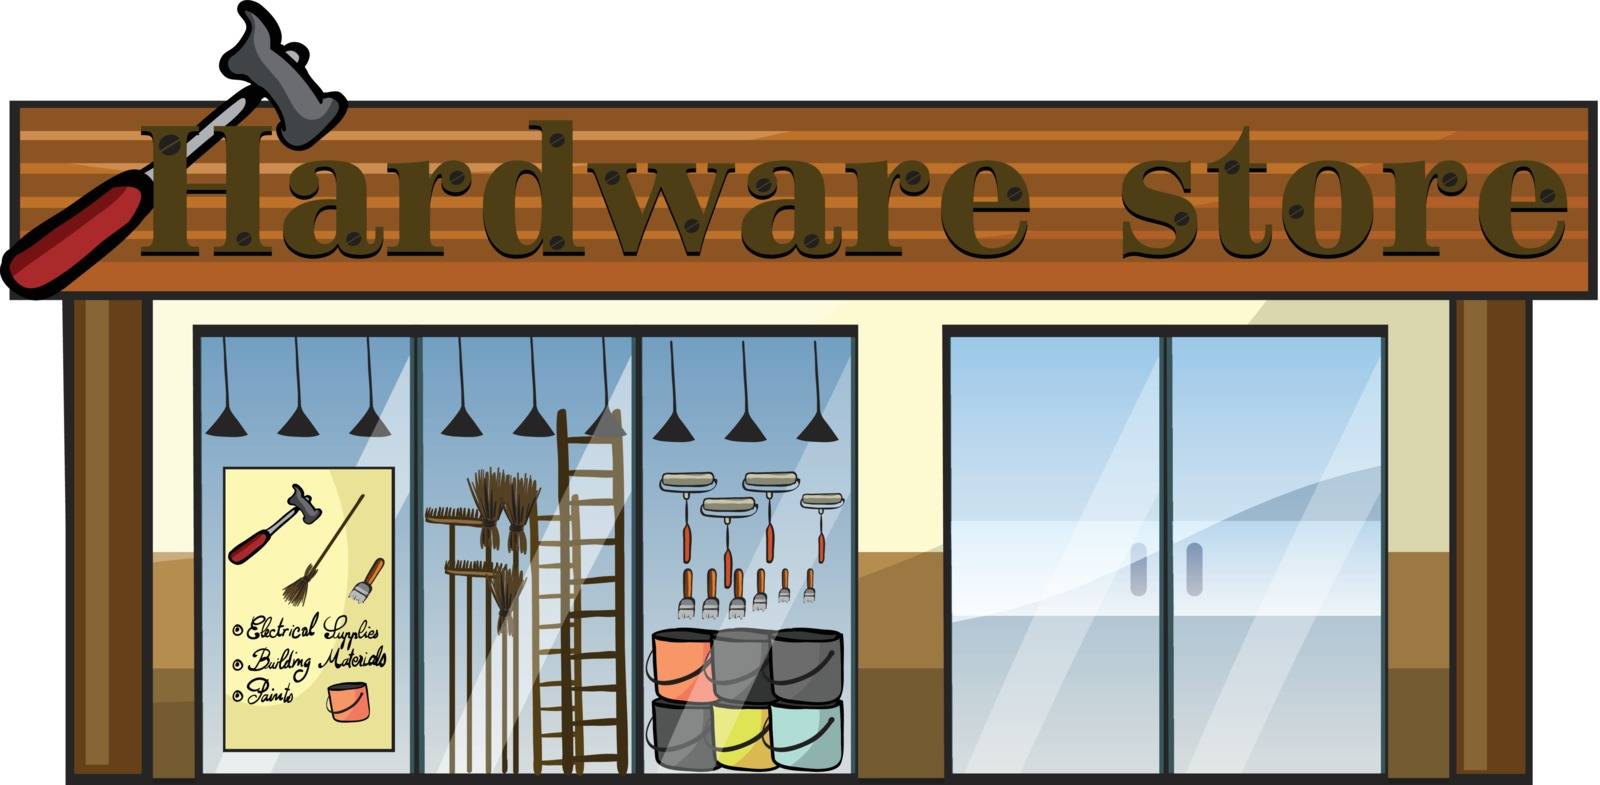 A hardware store by iimages